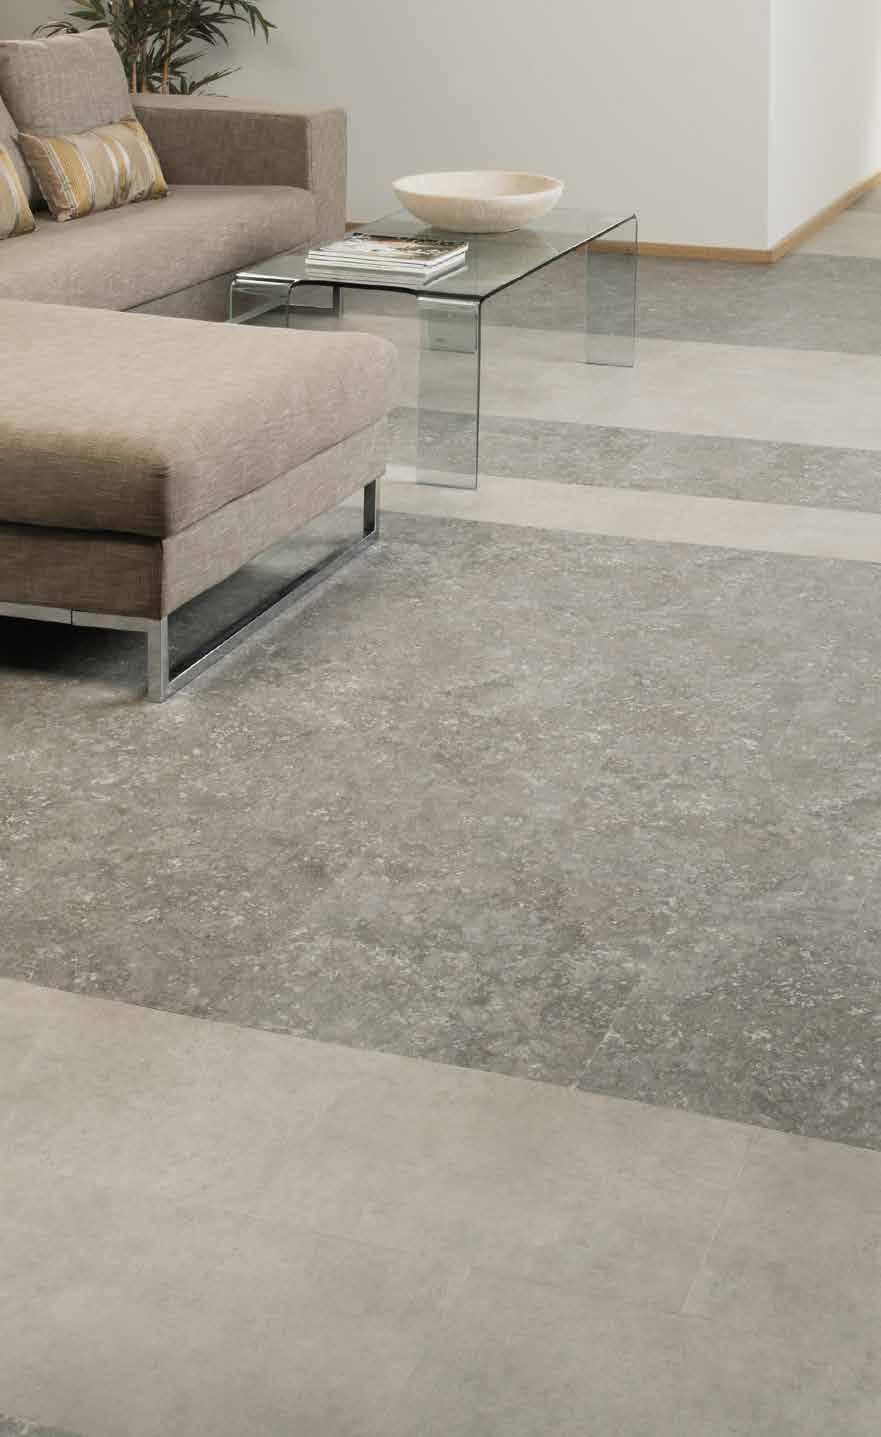 STONE DRY STONE SIENNA Organic surface design with an earthy, embossed mottling.